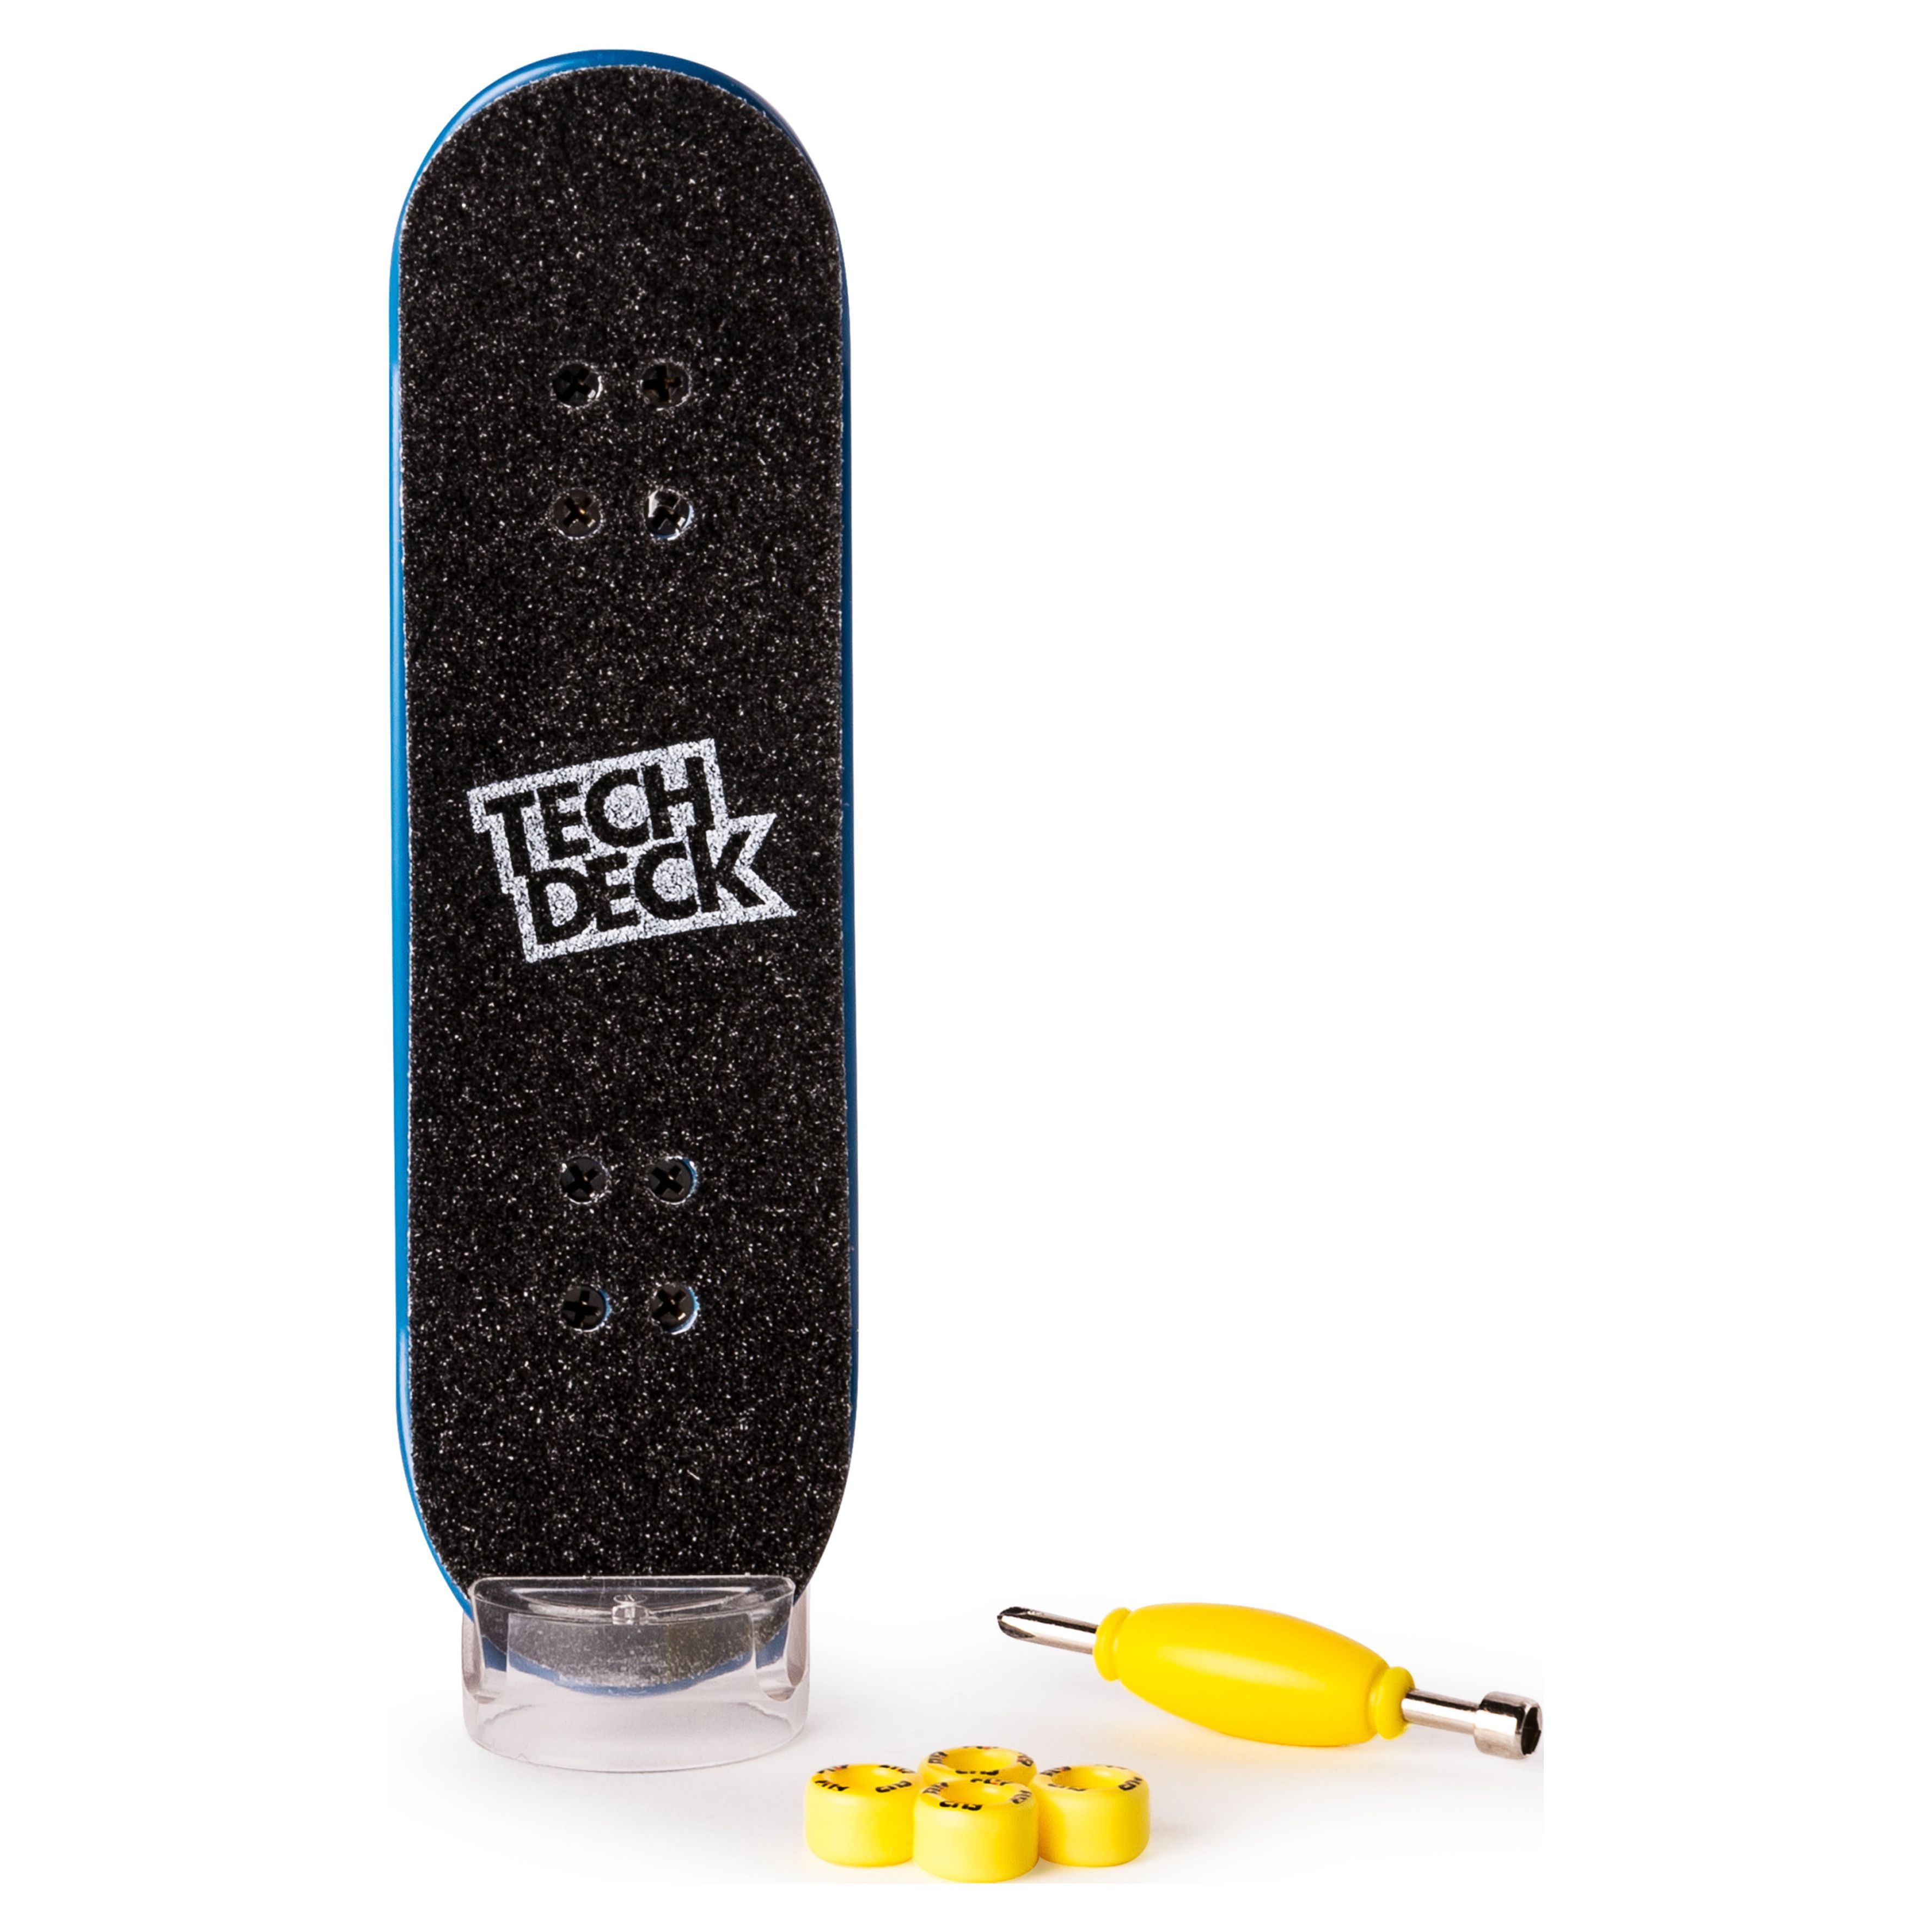 Tech Deck, 96mm Fingerboard Mini Skateboard with Authentic Designs, For Ages 6 and Up (Styles May Vary) - image 5 of 8